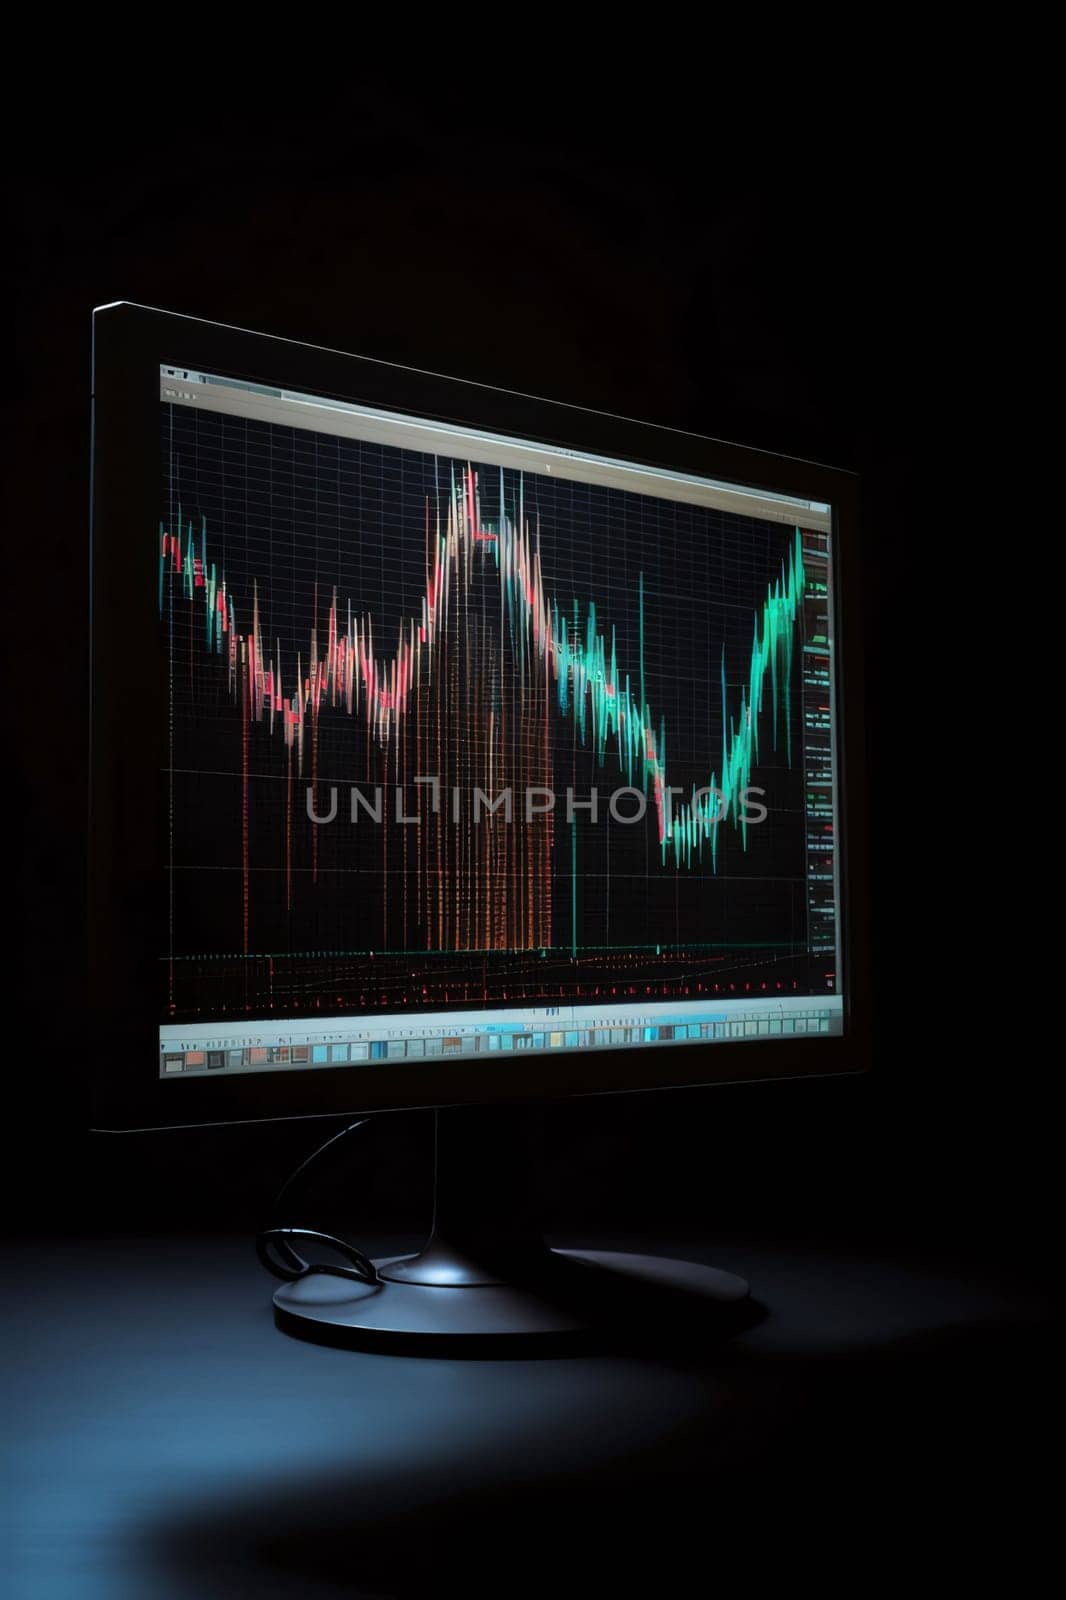 Stock Market: Monitor with stock market chart on dark background. 3D rendering.